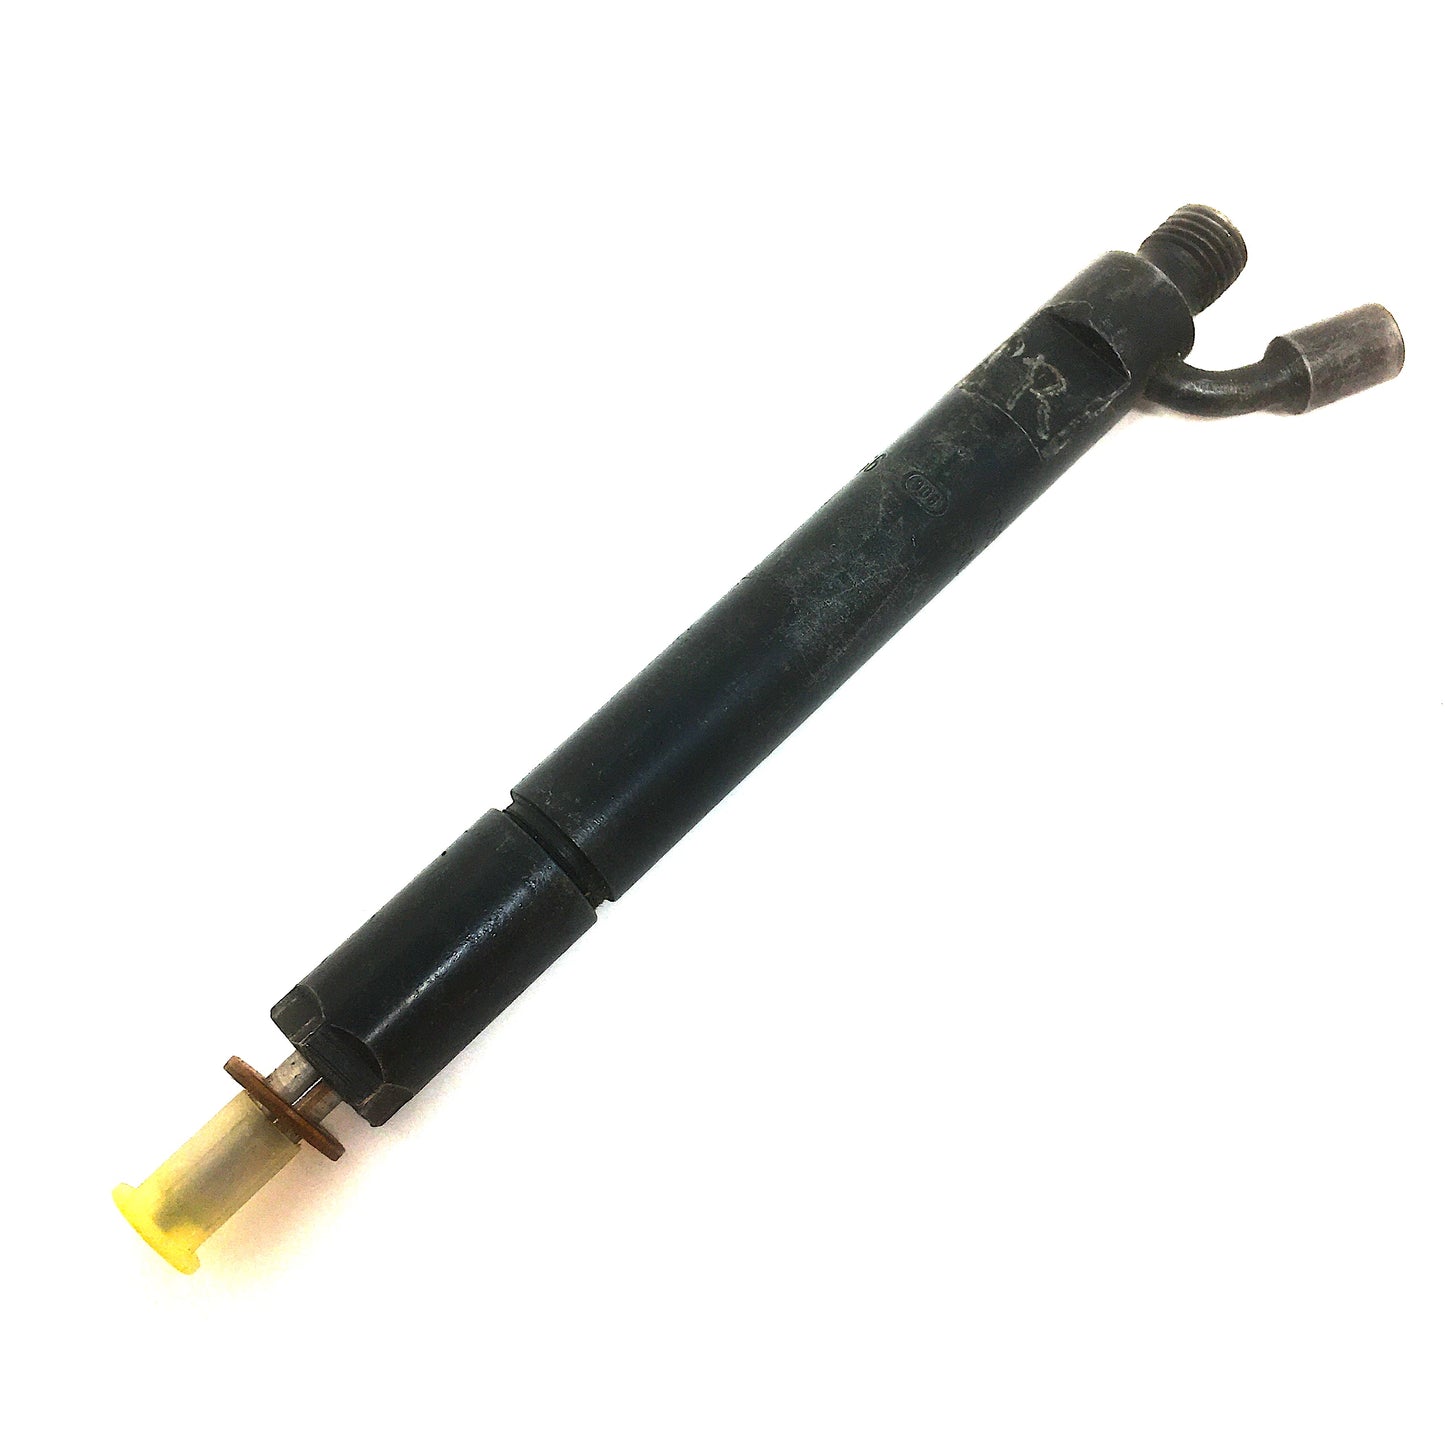 Fuel Injector for Cummins CPL1270 (0-432-191-796)